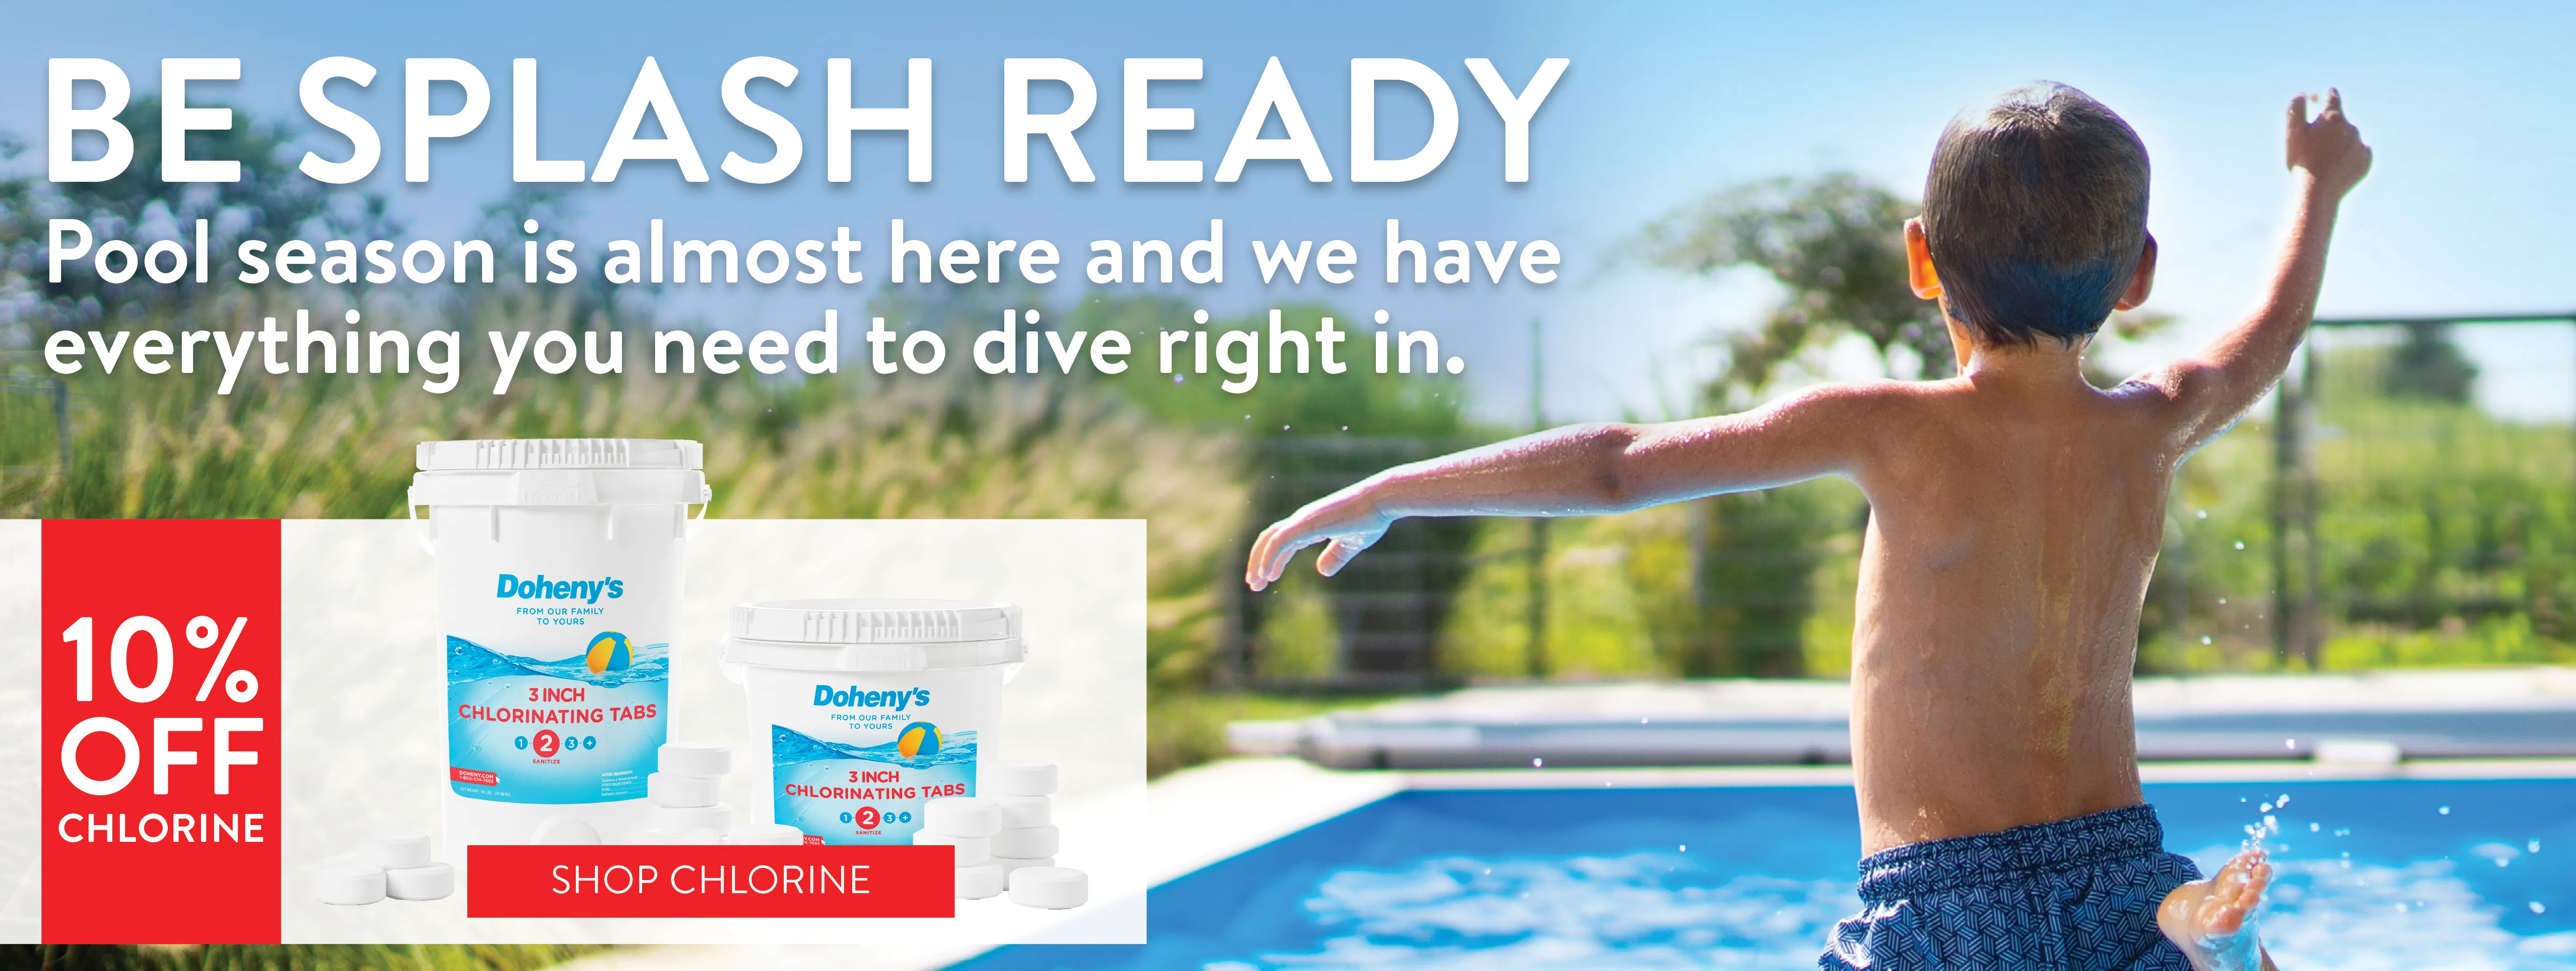 Be Splash Ready! Pool season is almost here and we have everything you need to dive right in! Shop Chlorine now.